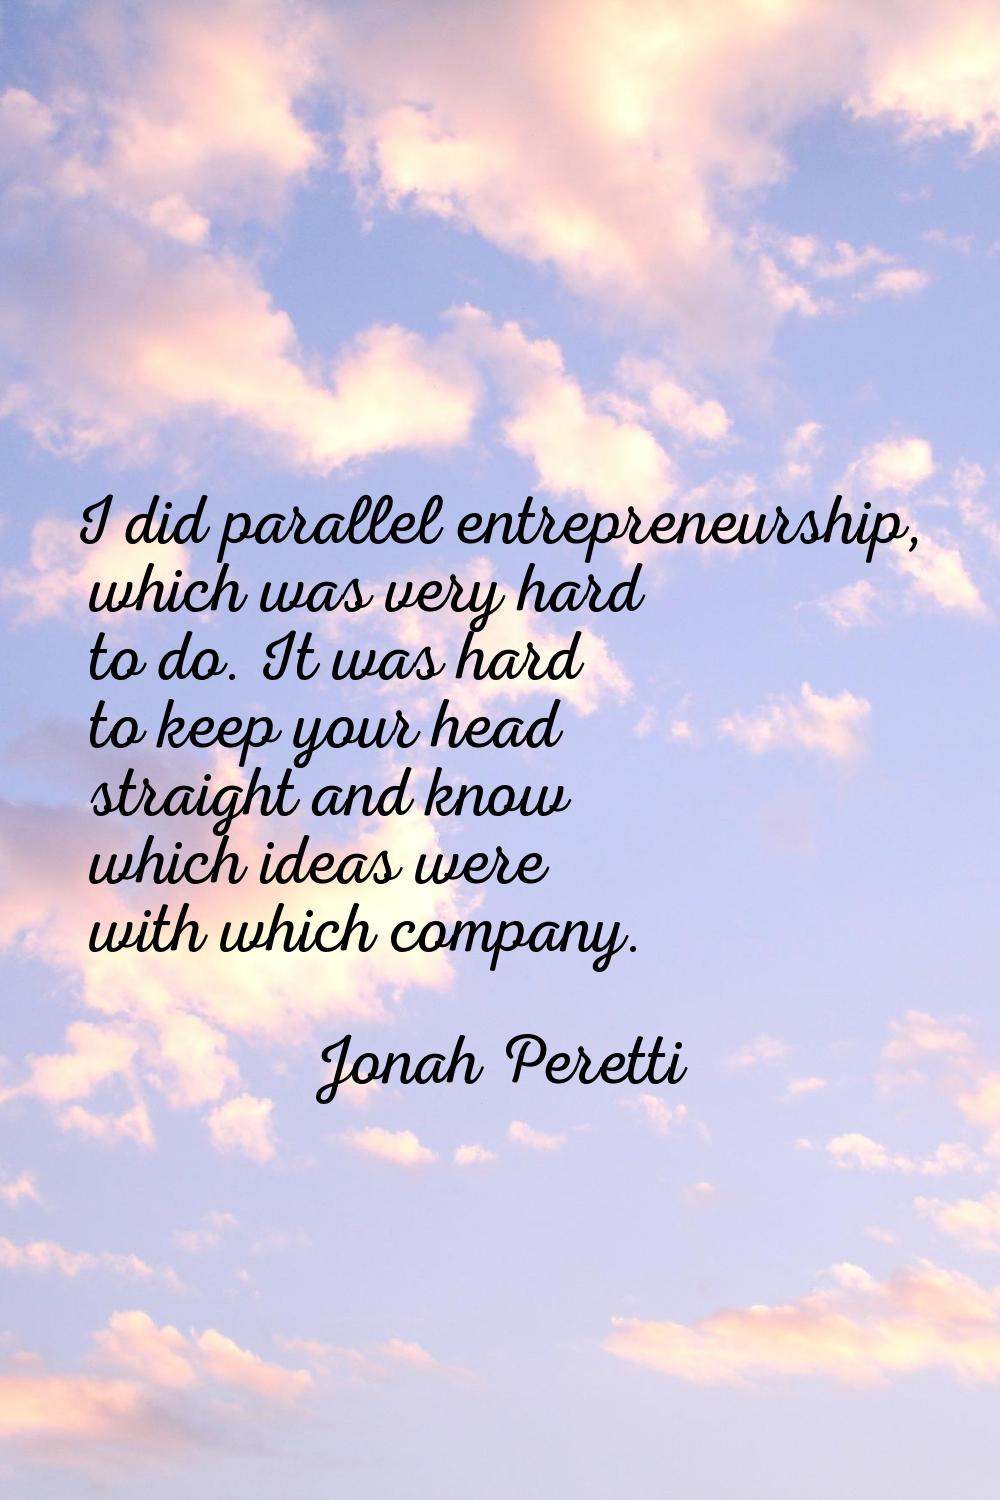 I did parallel entrepreneurship, which was very hard to do. It was hard to keep your head straight 